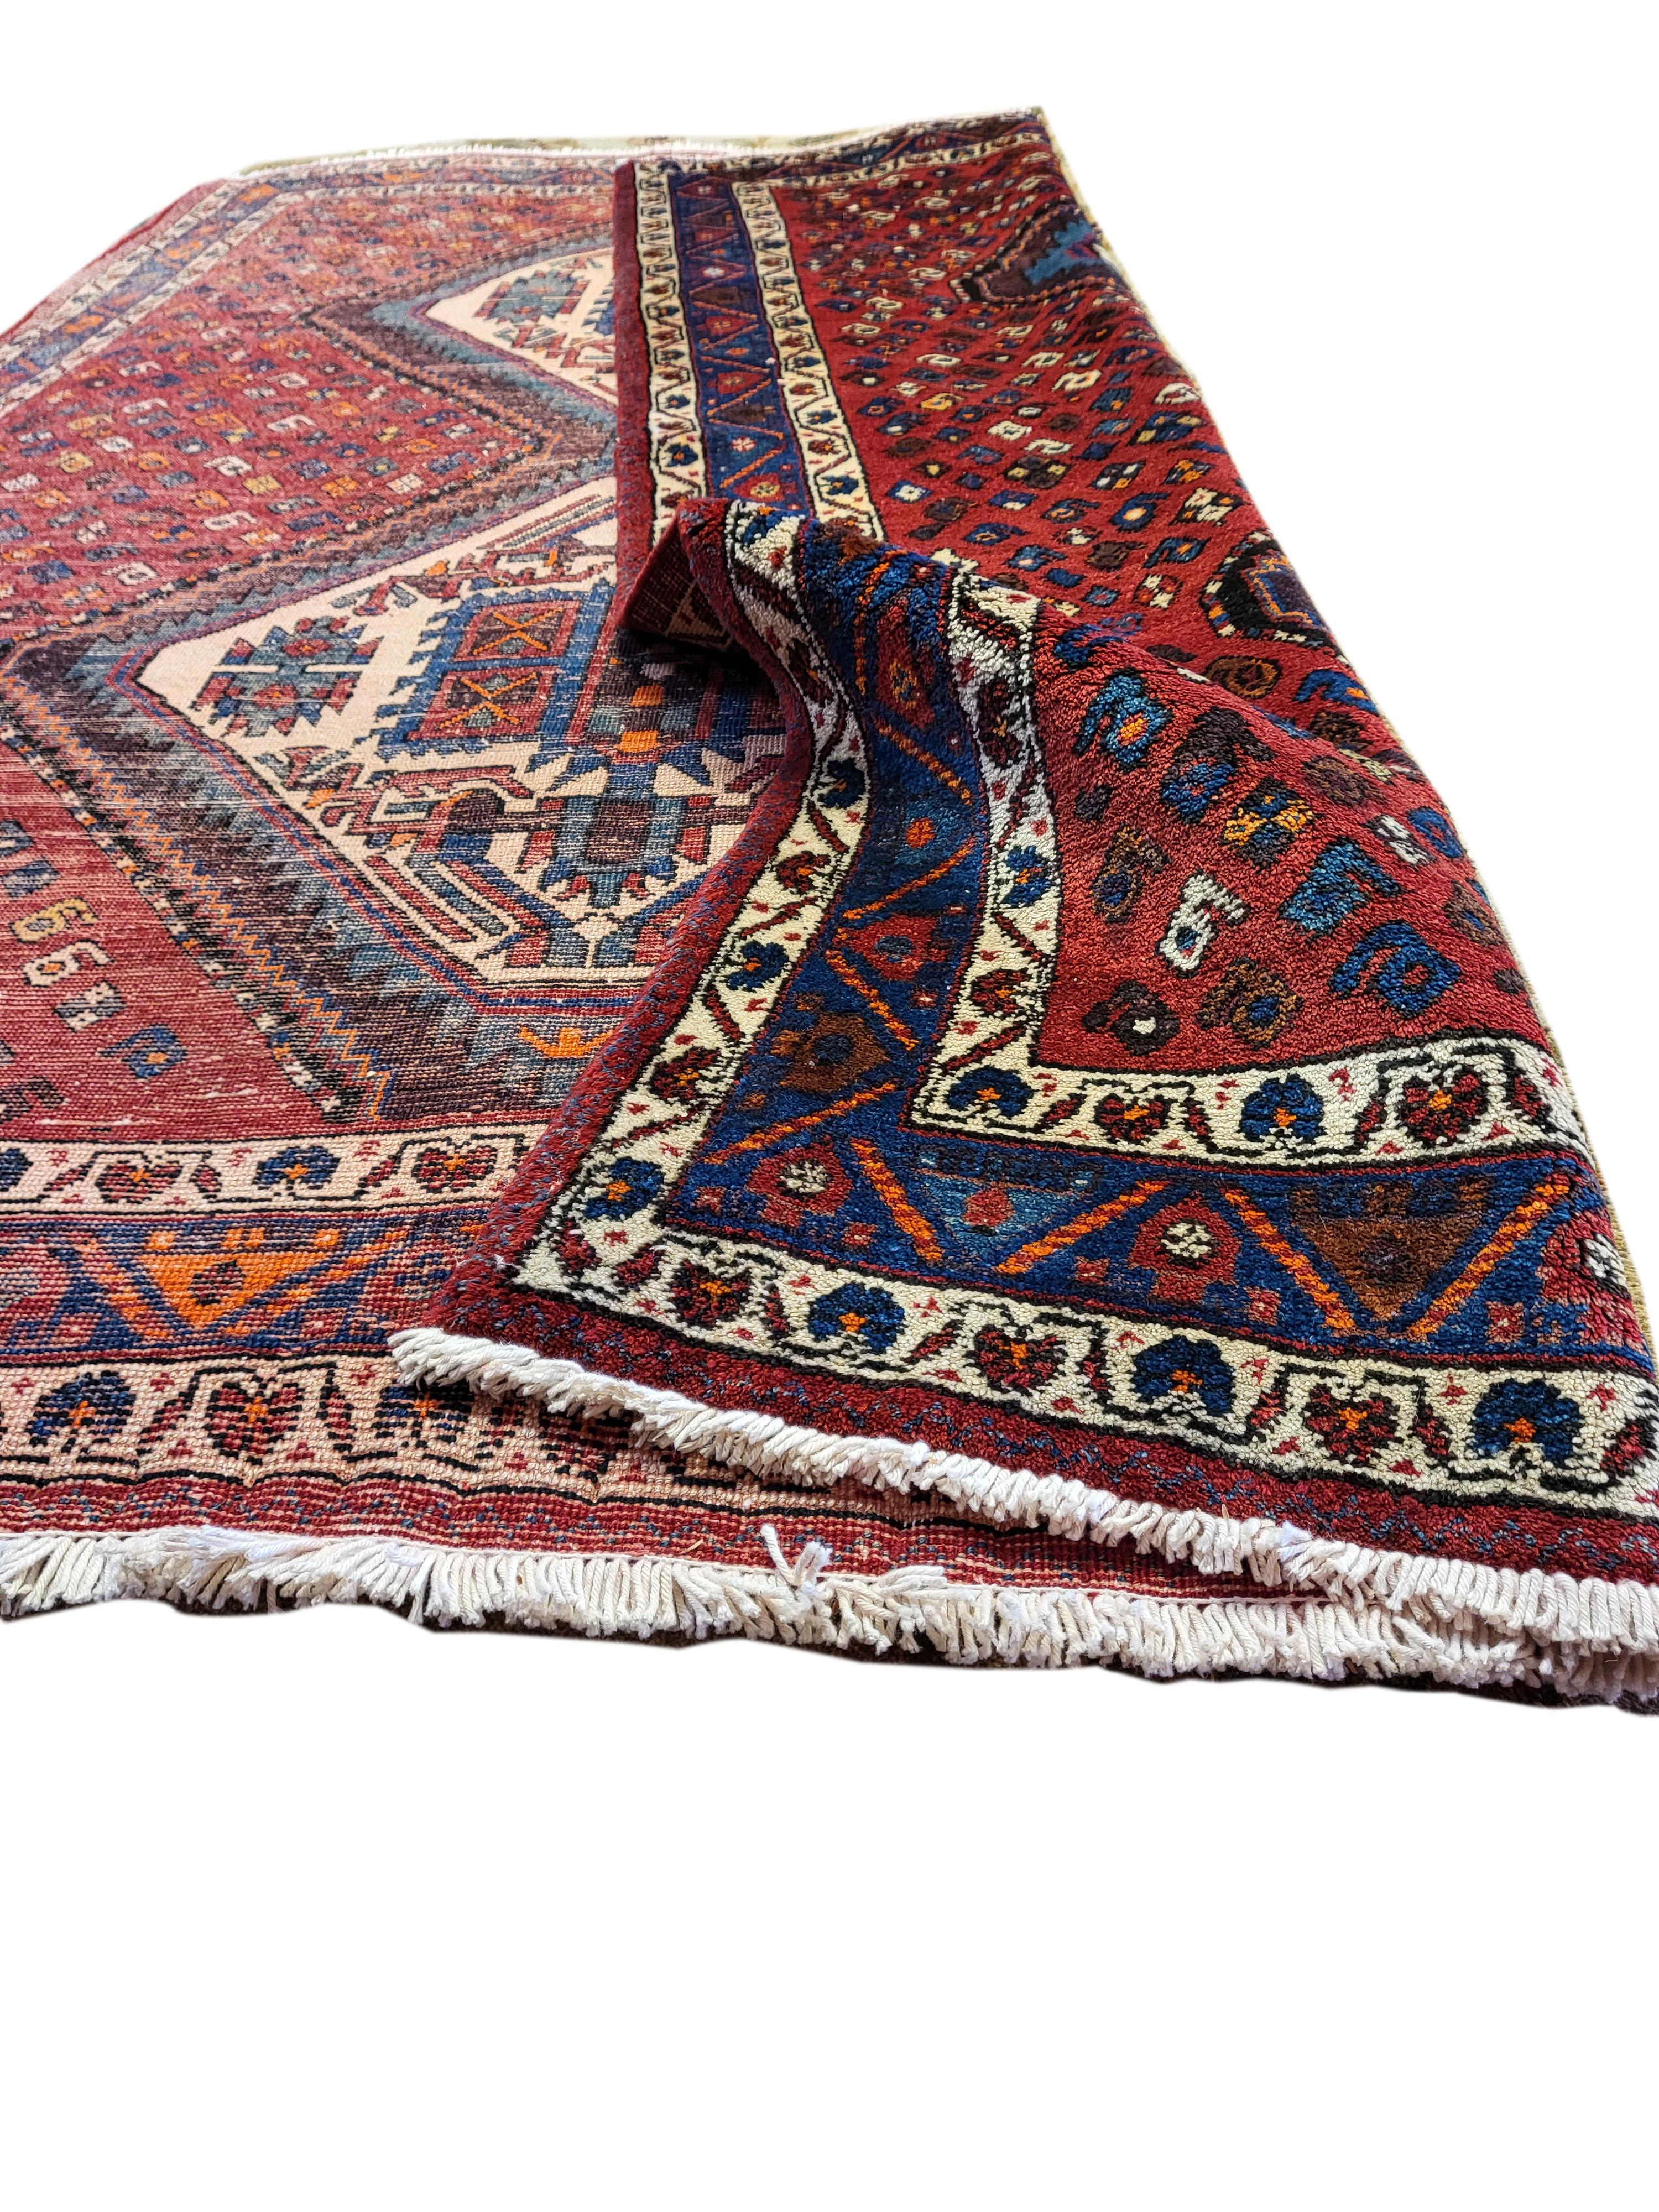 Gorgeous 50's Sirjan-Afshar Persian rug. Featuring 2 intricate medallions on a foreground rich in motifs. The color scheme and motifs are signature to the Sirjan-Afshar design. The remarkable craftsmanship is reflected in the almost pristine